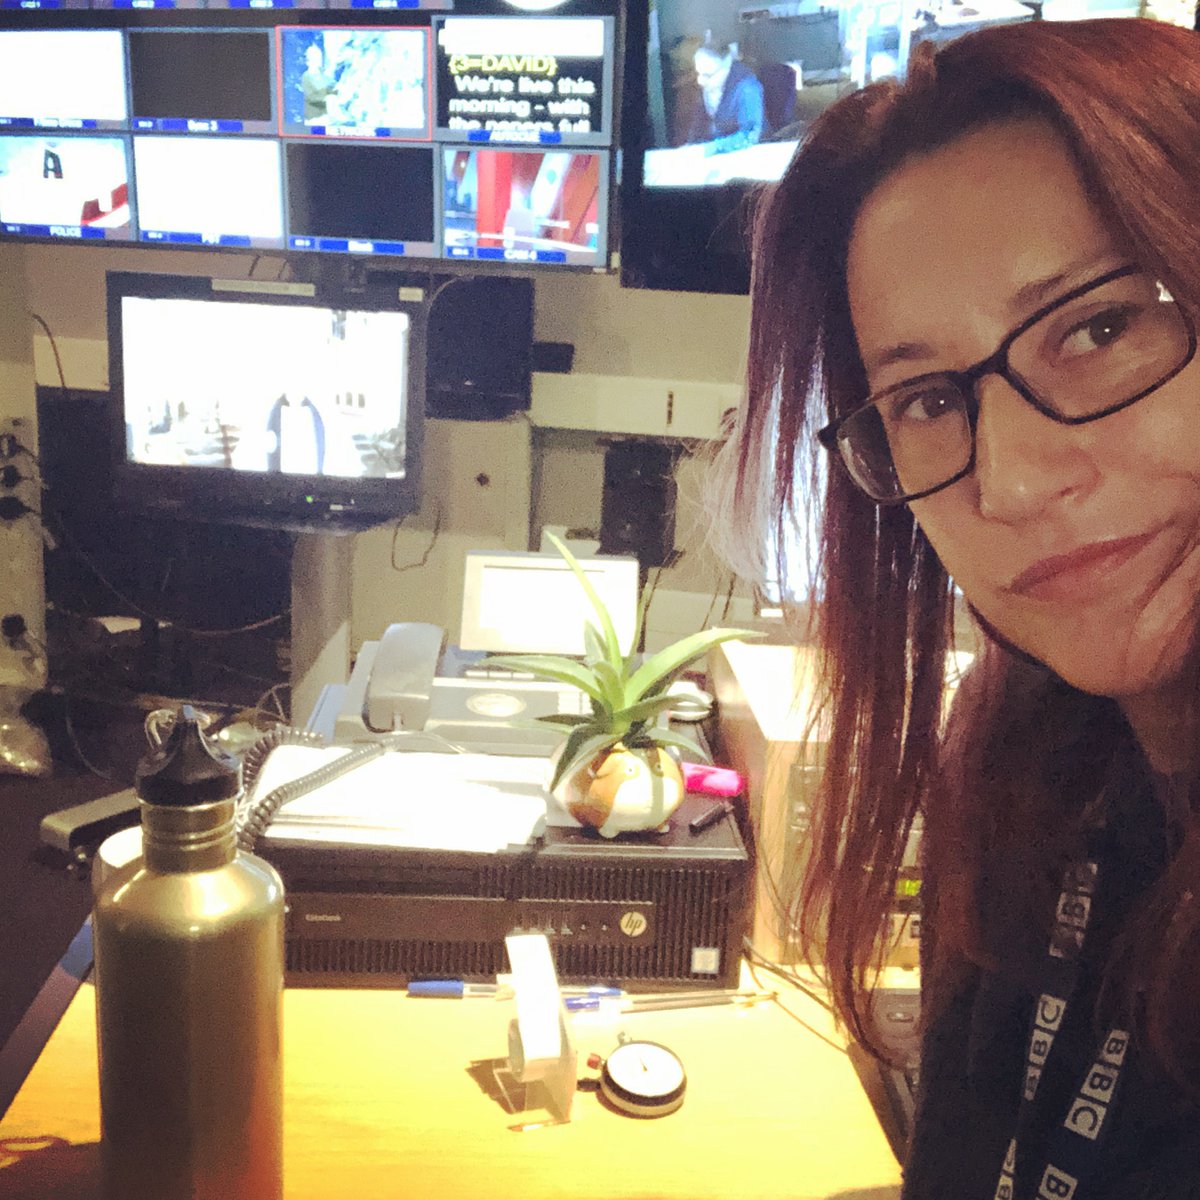 Prepping to #galleryPA #live #politics #politicswest Been a while! 🤪 #mutiskilling #TV #techy #today #livepolitics #bbcone #adrenaline #livetv #focus